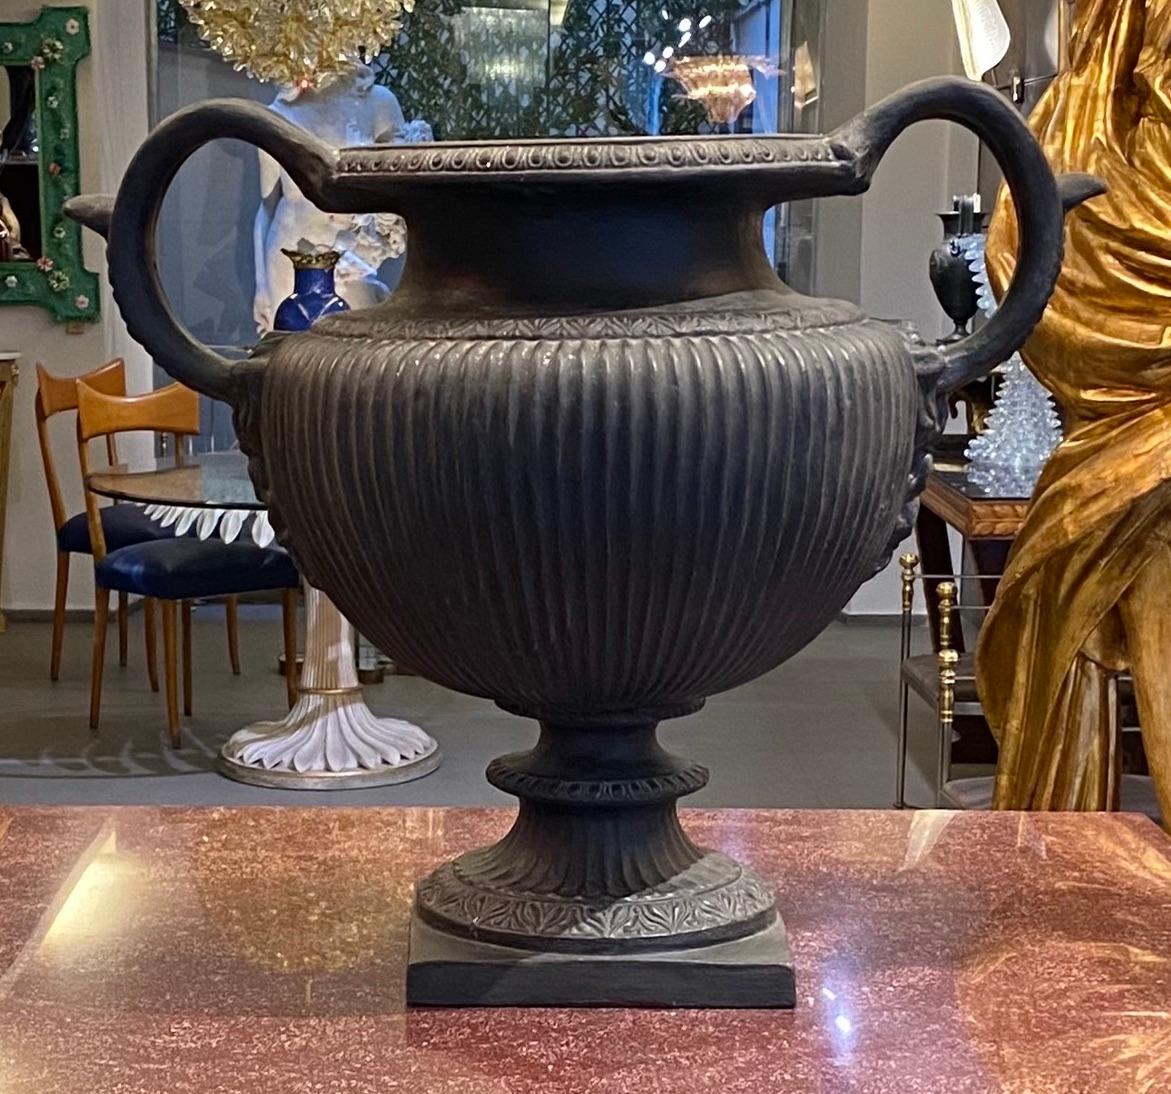 Elegant Italian 19th century neoclassical black painted terracotta vase after the original Roman marble vase. 
Bordered center body decorated with stylized bands of palmettes. 
Similar examples are present in the Capitolium Museum in